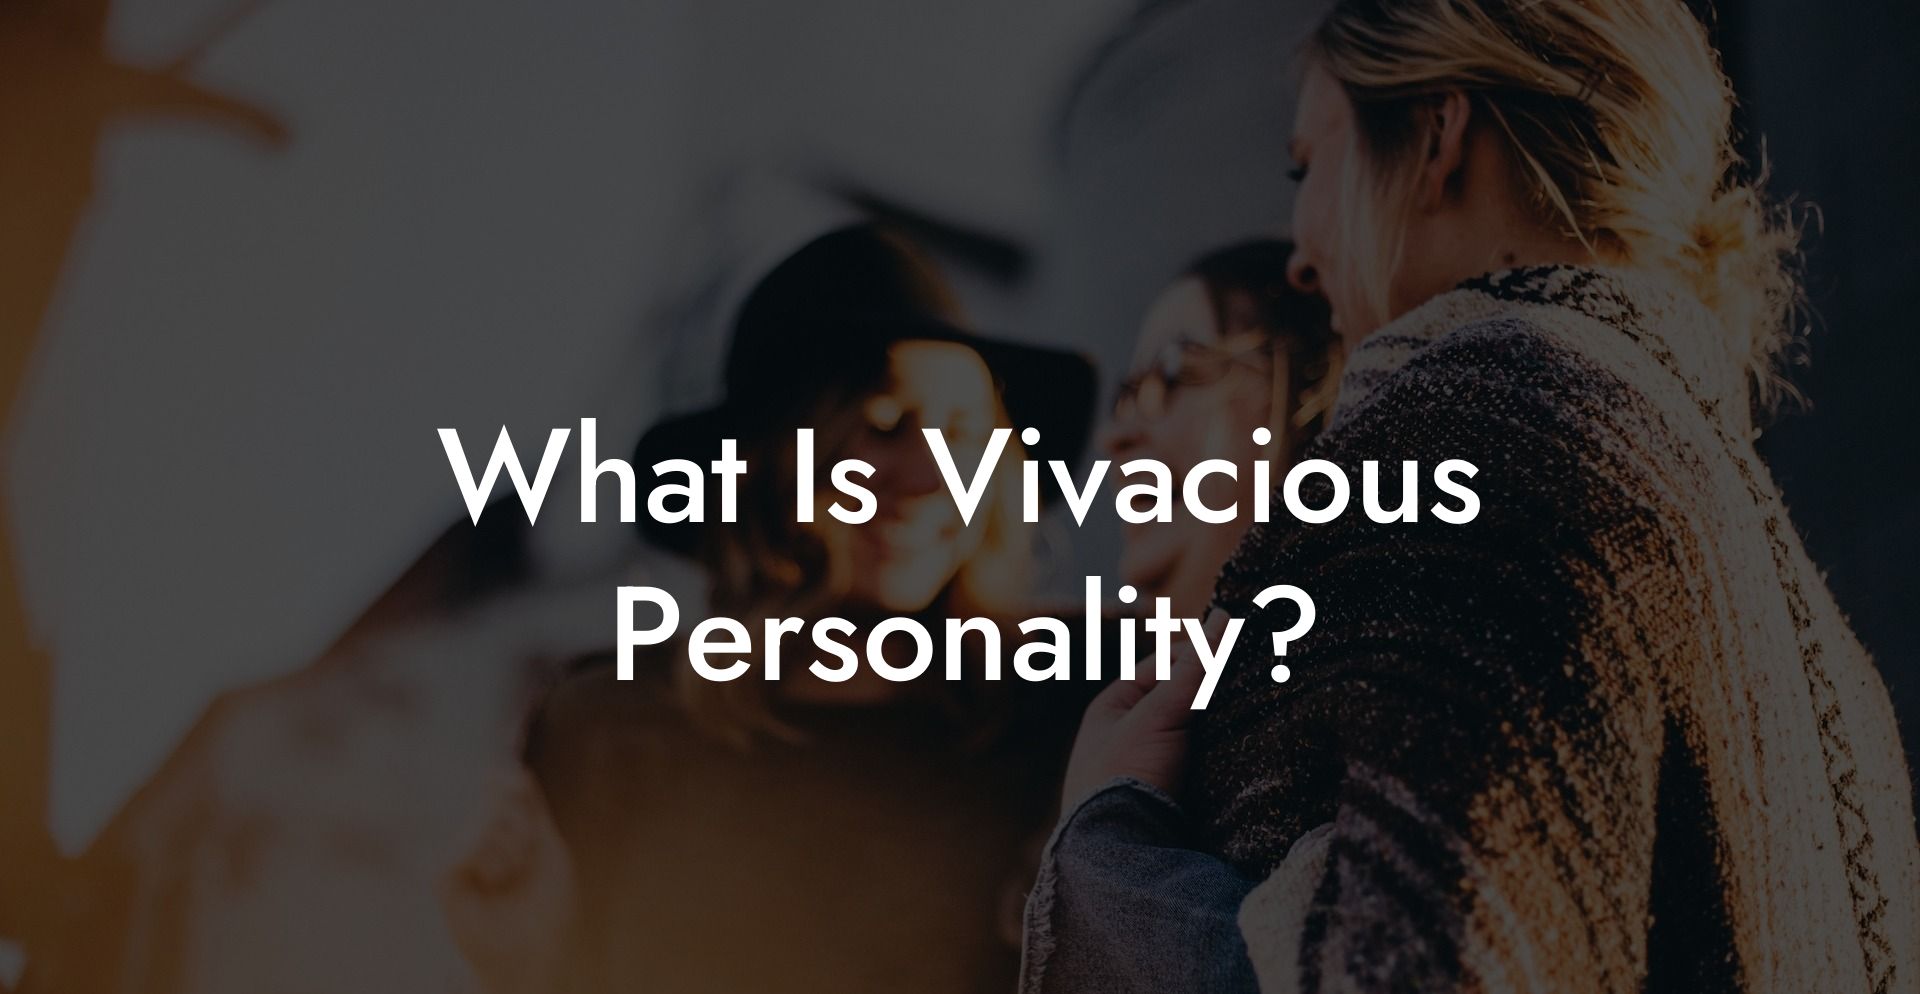 What Is Vivacious Personality?